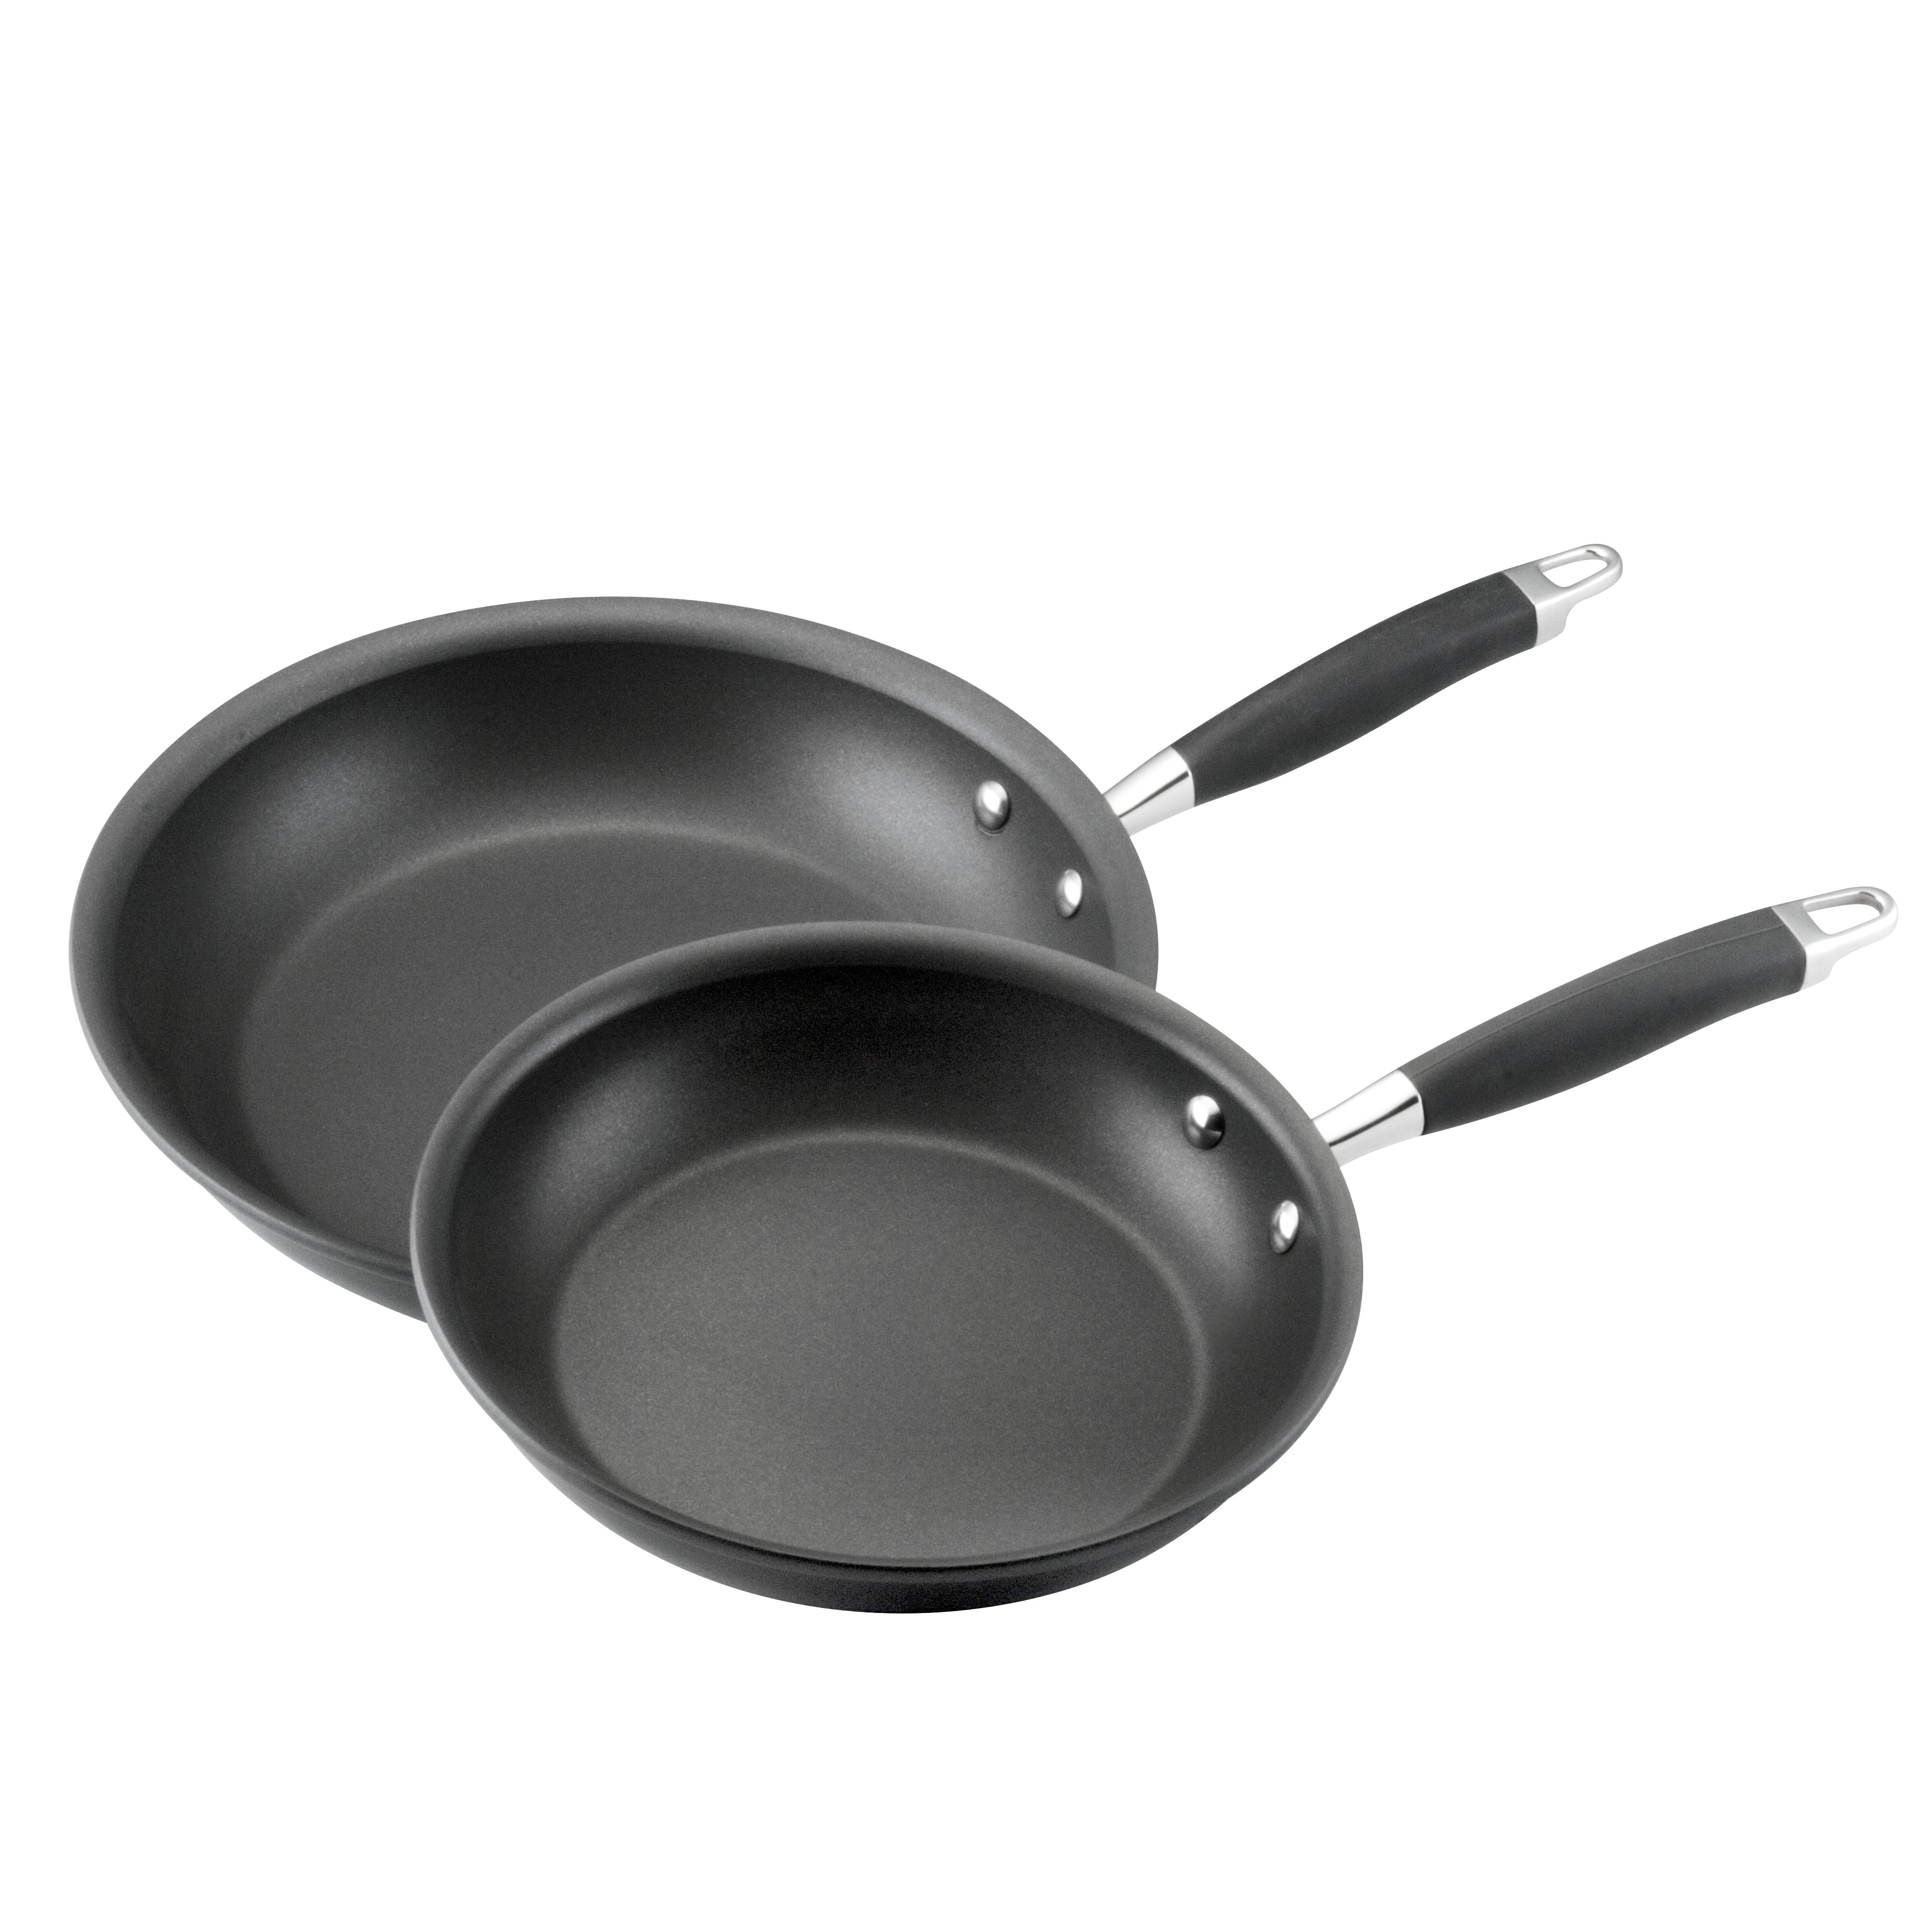 Anolon Advanced Hard-Anodized Nonstick Frying Pan Set, 10 and 12 Fry Pans  Graphite 